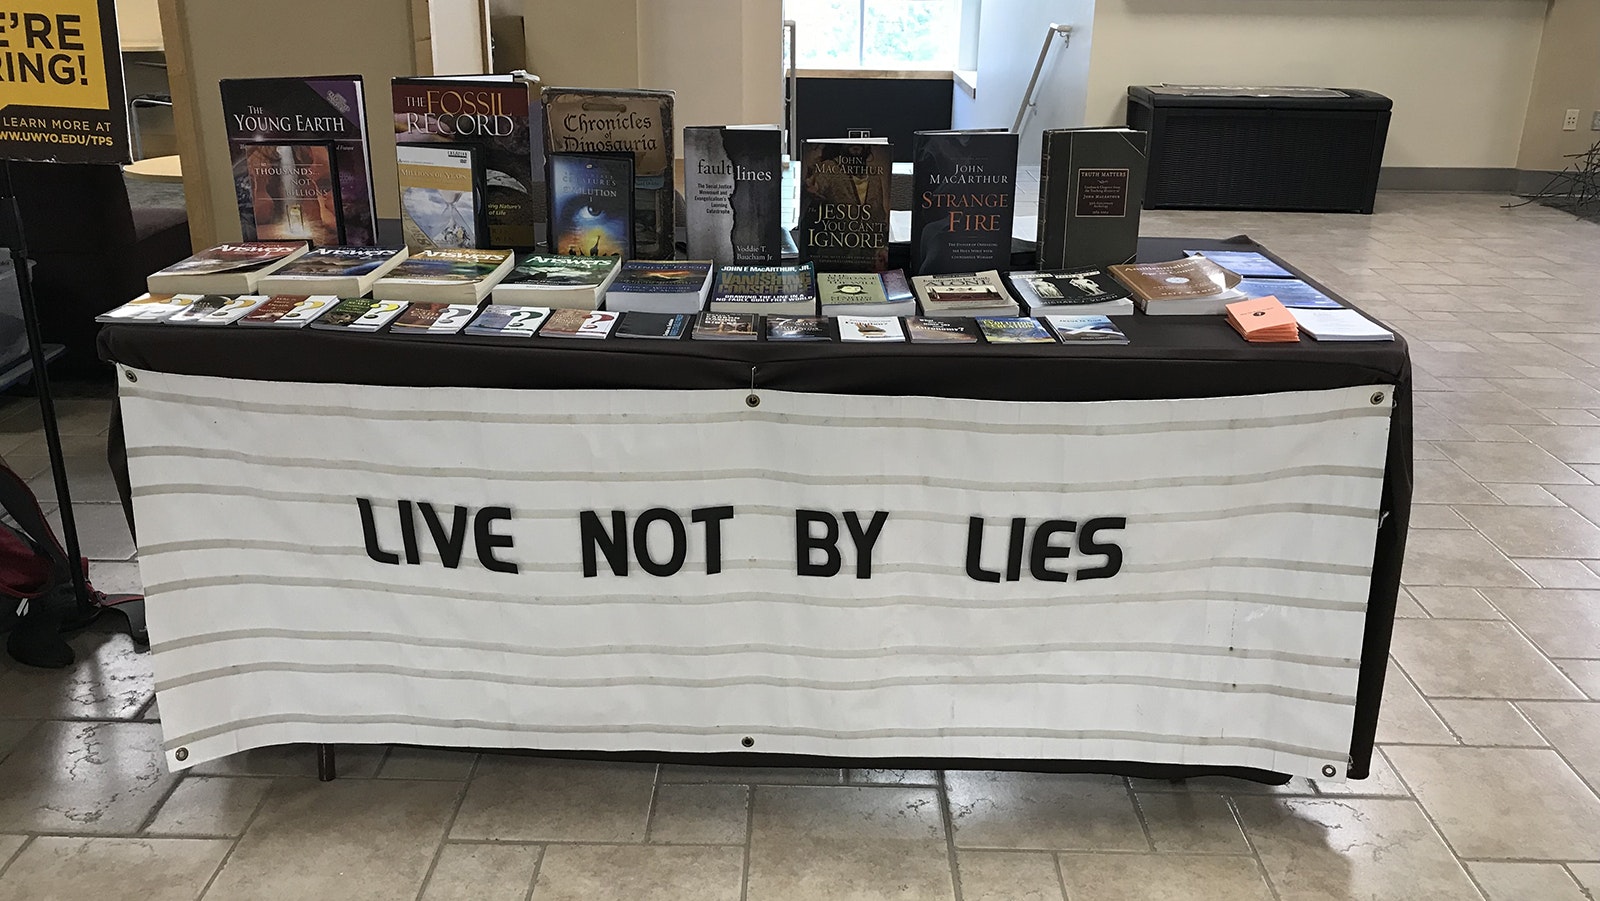 Laramie evangelist Todd Schmidt presents a table at the University of Wyoming Student Union every Friday. The sign on the front of his table usually has a different religious-based message.